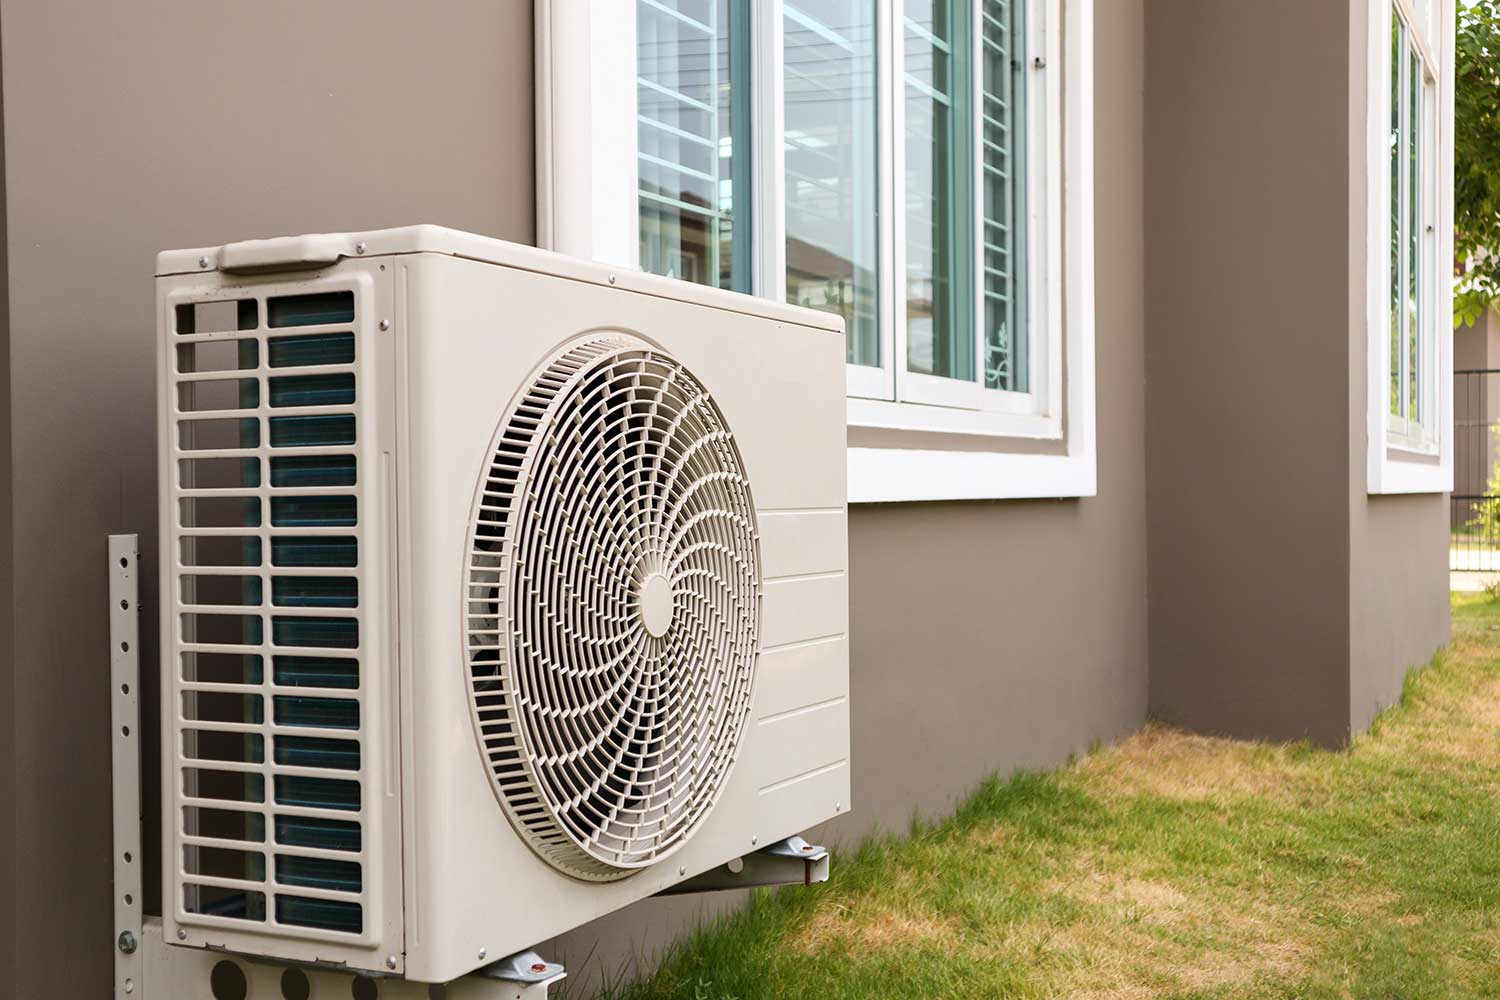 Zoned Heating and Air Conditioning same temp in every room